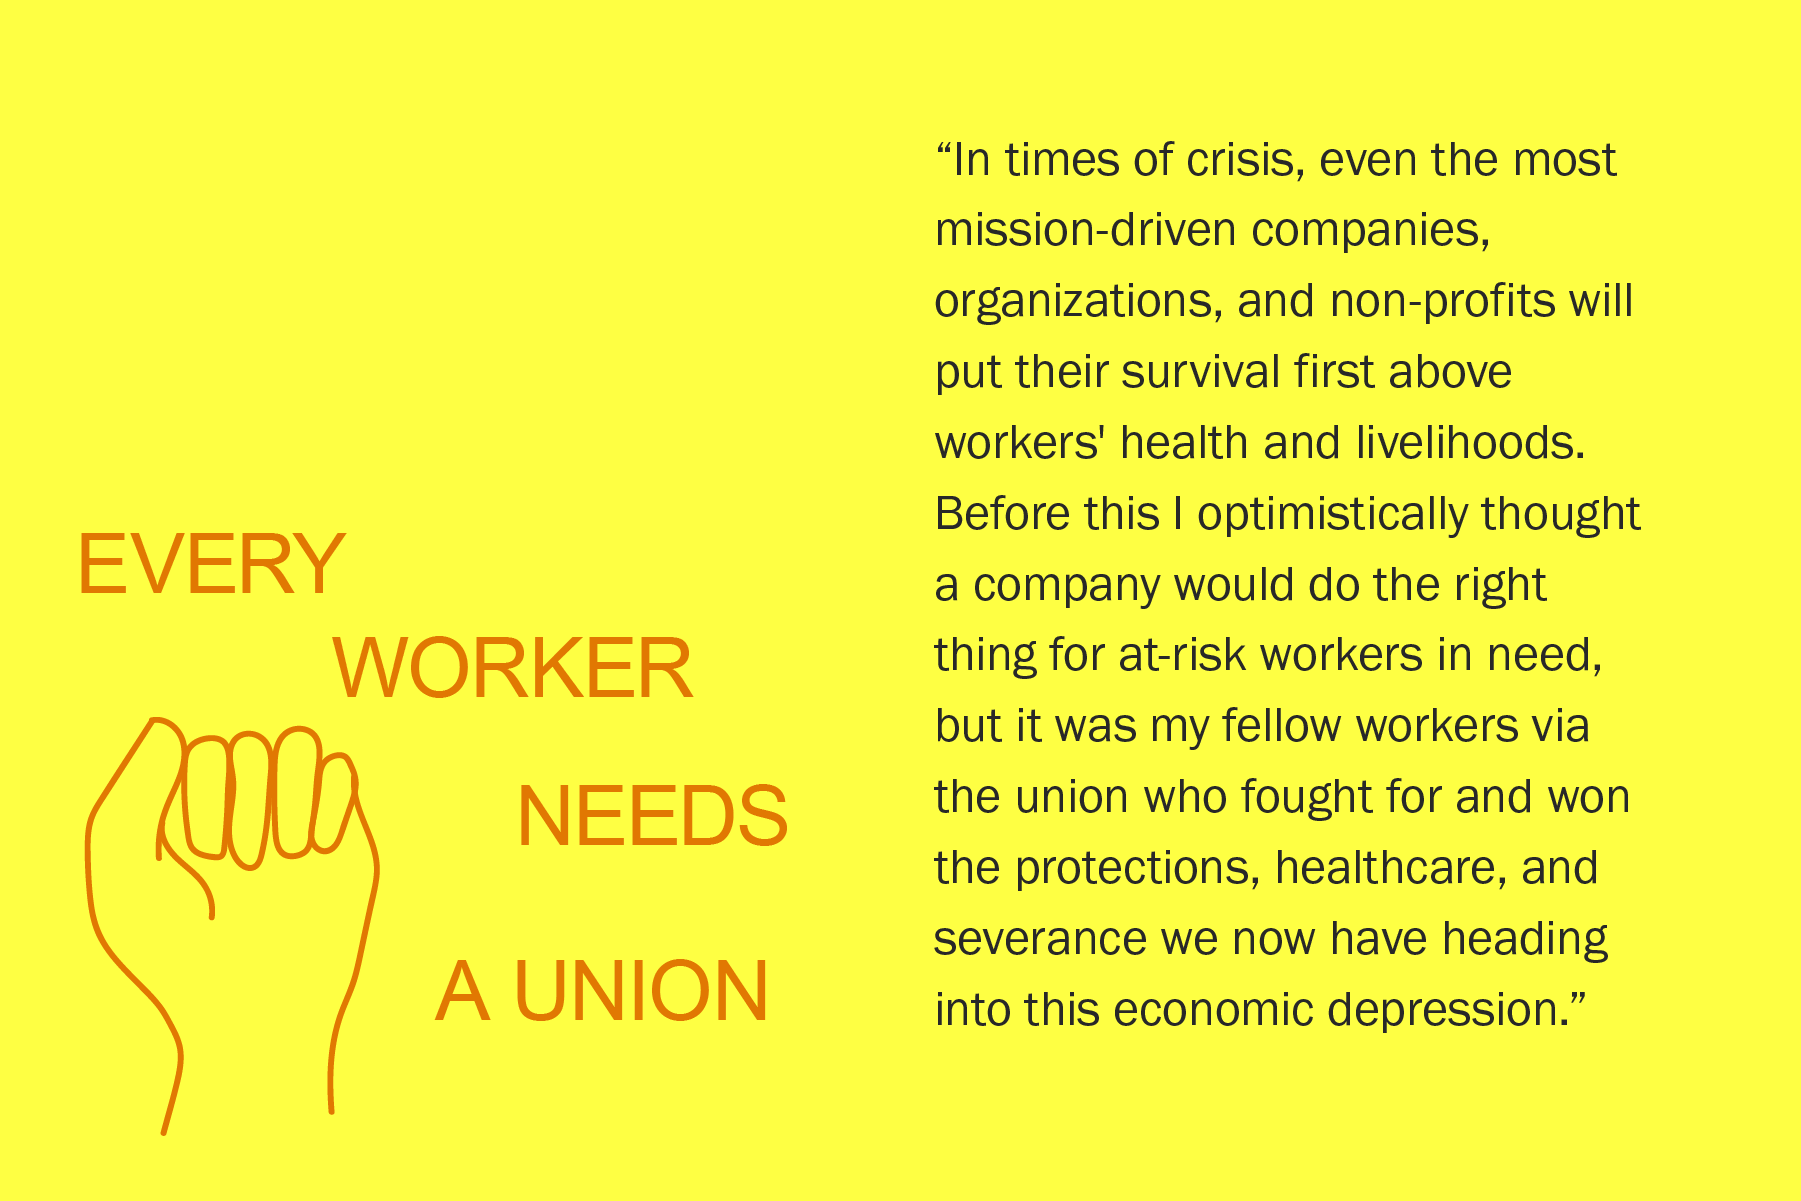 In times of crisis, even the most mission-driven companies, organizations, and non-profits will put their survival first above workers' health and livelihoods. Before this I optimistically thought a company would do the right thing for at-risk workers in need, but it was my fellow workers via the union who fought for and won the protections, healthcare, and severance we now have heading into this economic depression.